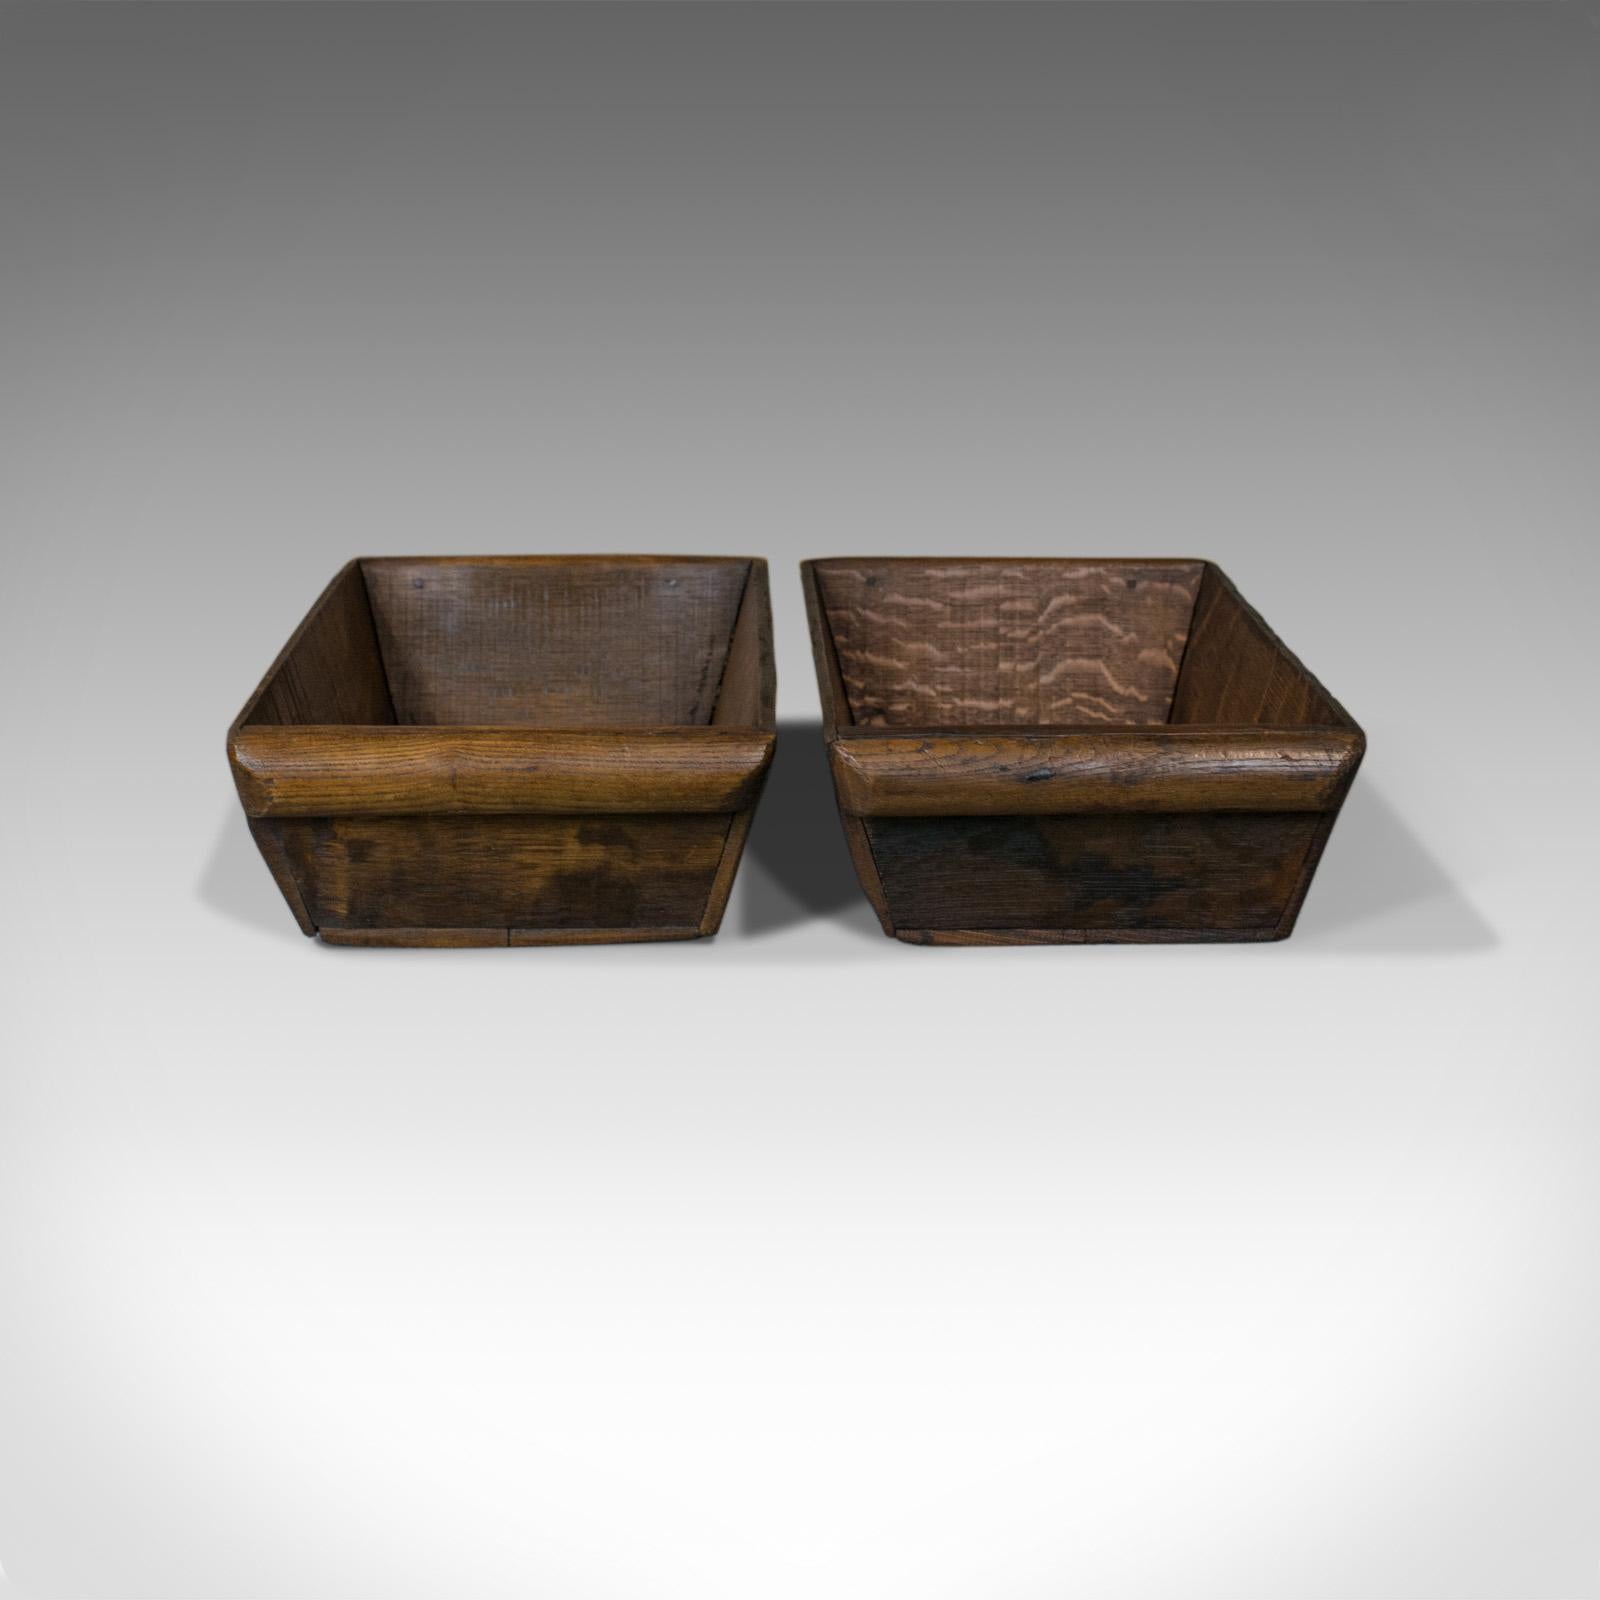 This is an antique pair of Victorian merchant's trays. Two English oak boat trays dating to the late 19th century, circa 1900.

Each tray displays grain interest and a desirable aged patina
Attractive wisps of medullary rays visible through the